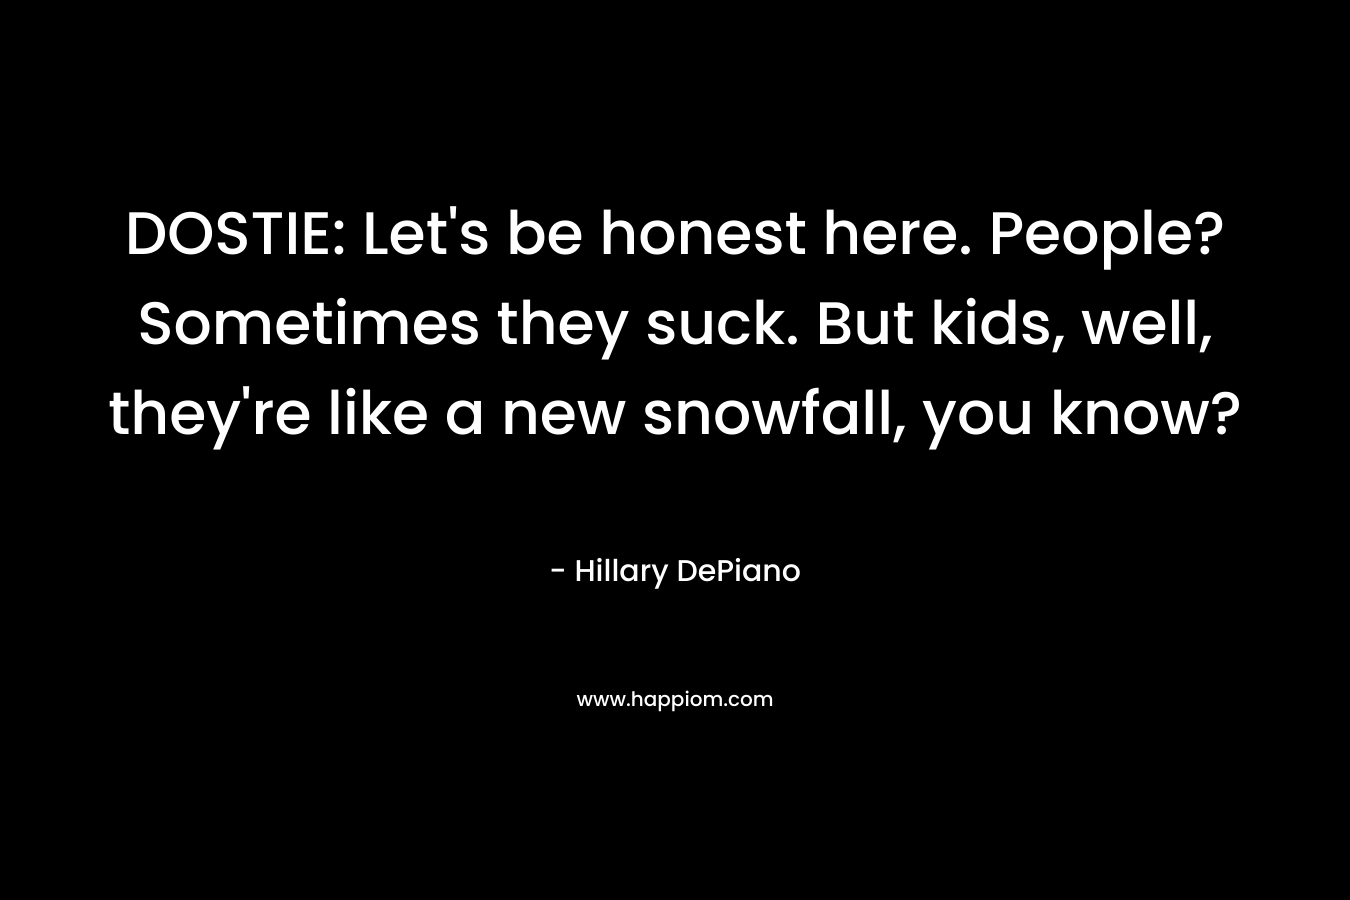 DOSTIE: Let's be honest here. People? Sometimes they suck. But kids, well, they're like a new snowfall, you know?